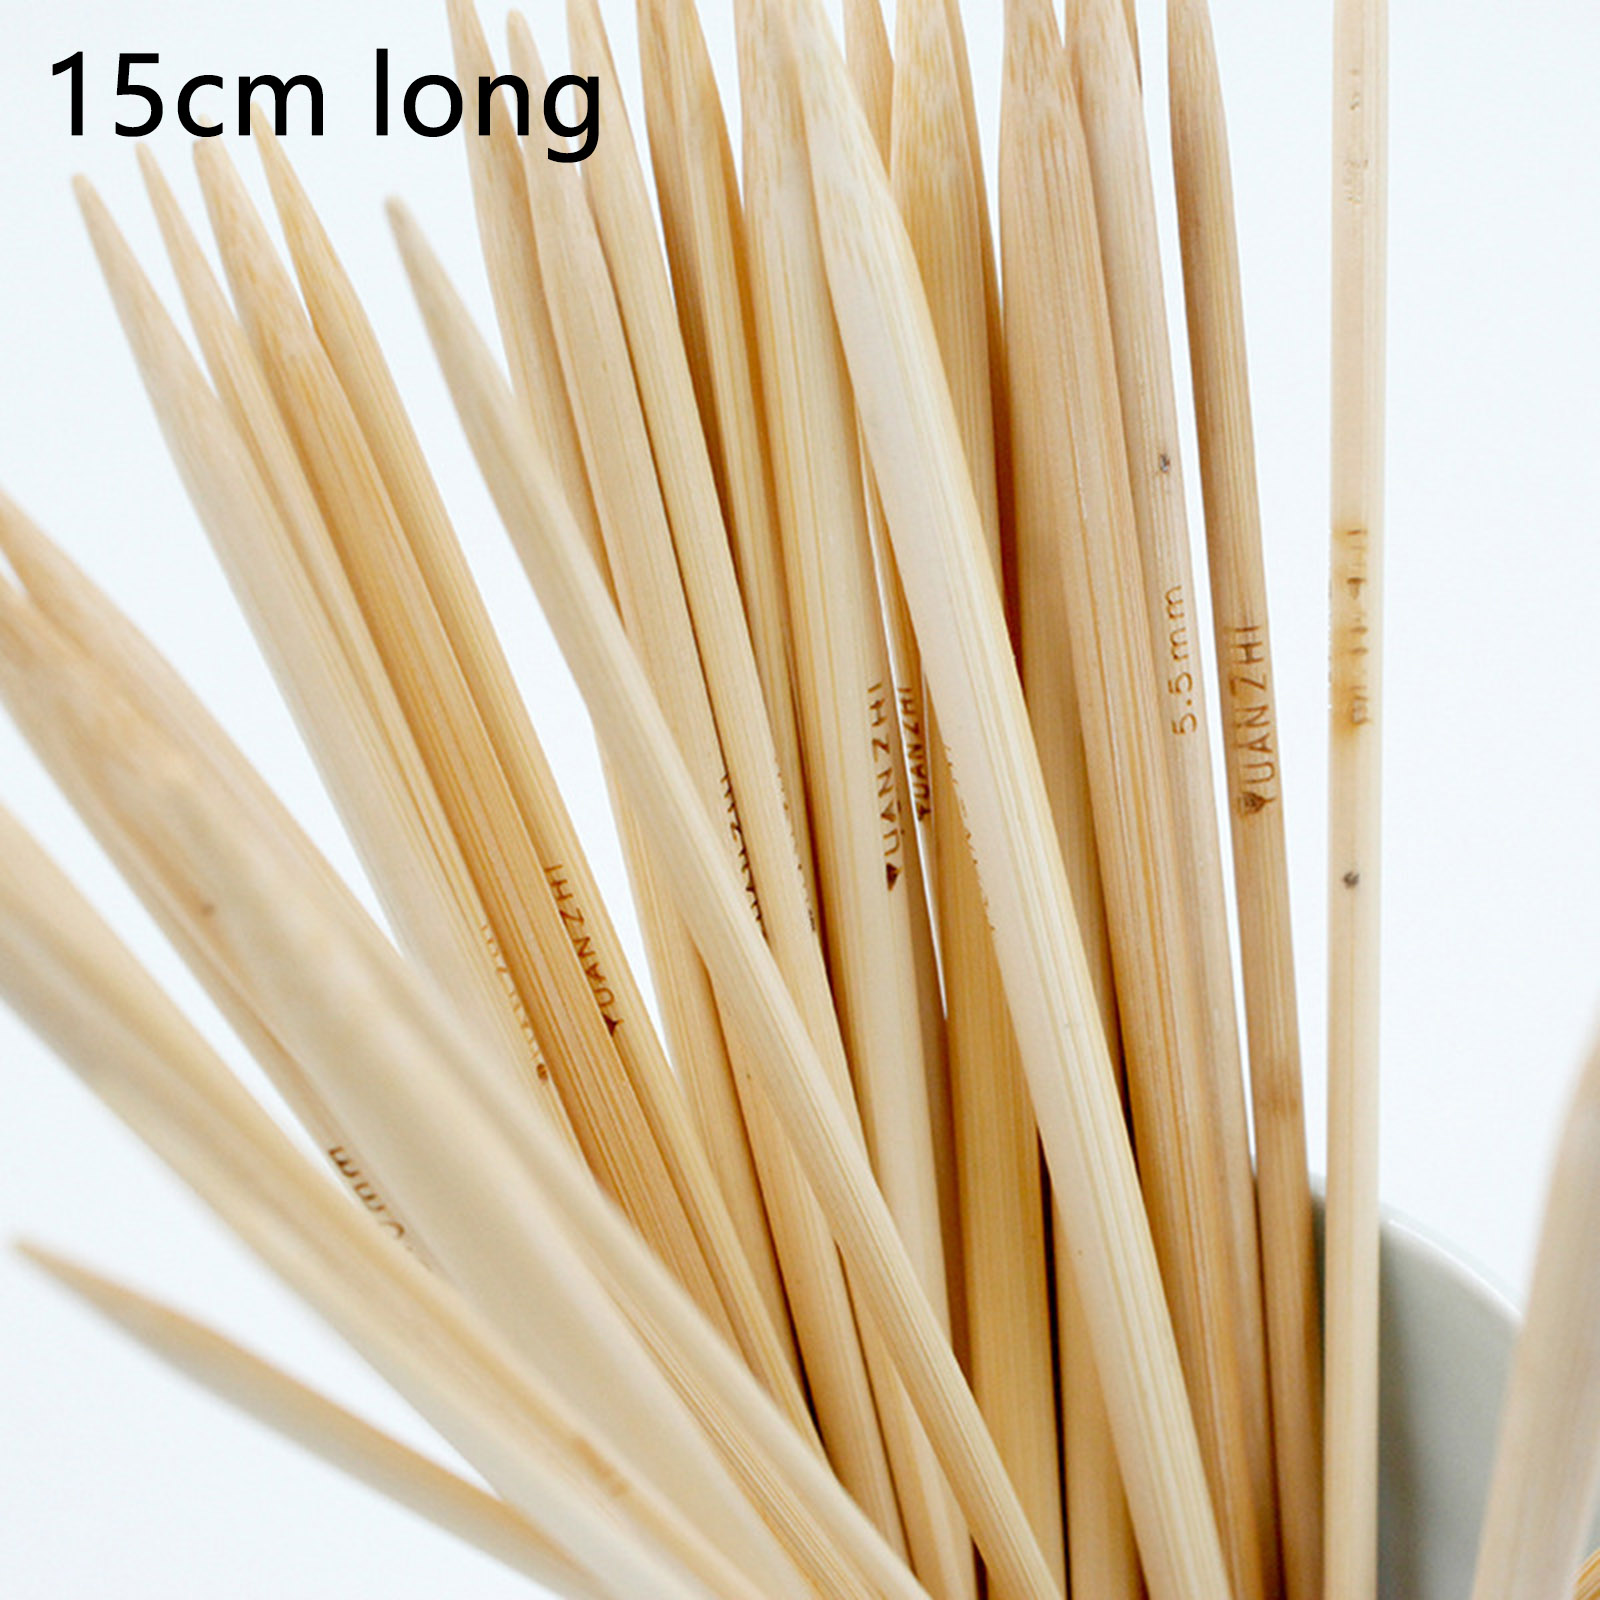 Picture of Bamboo Double Pointed Knitting Needles Natural 15cm(5 7/8") long